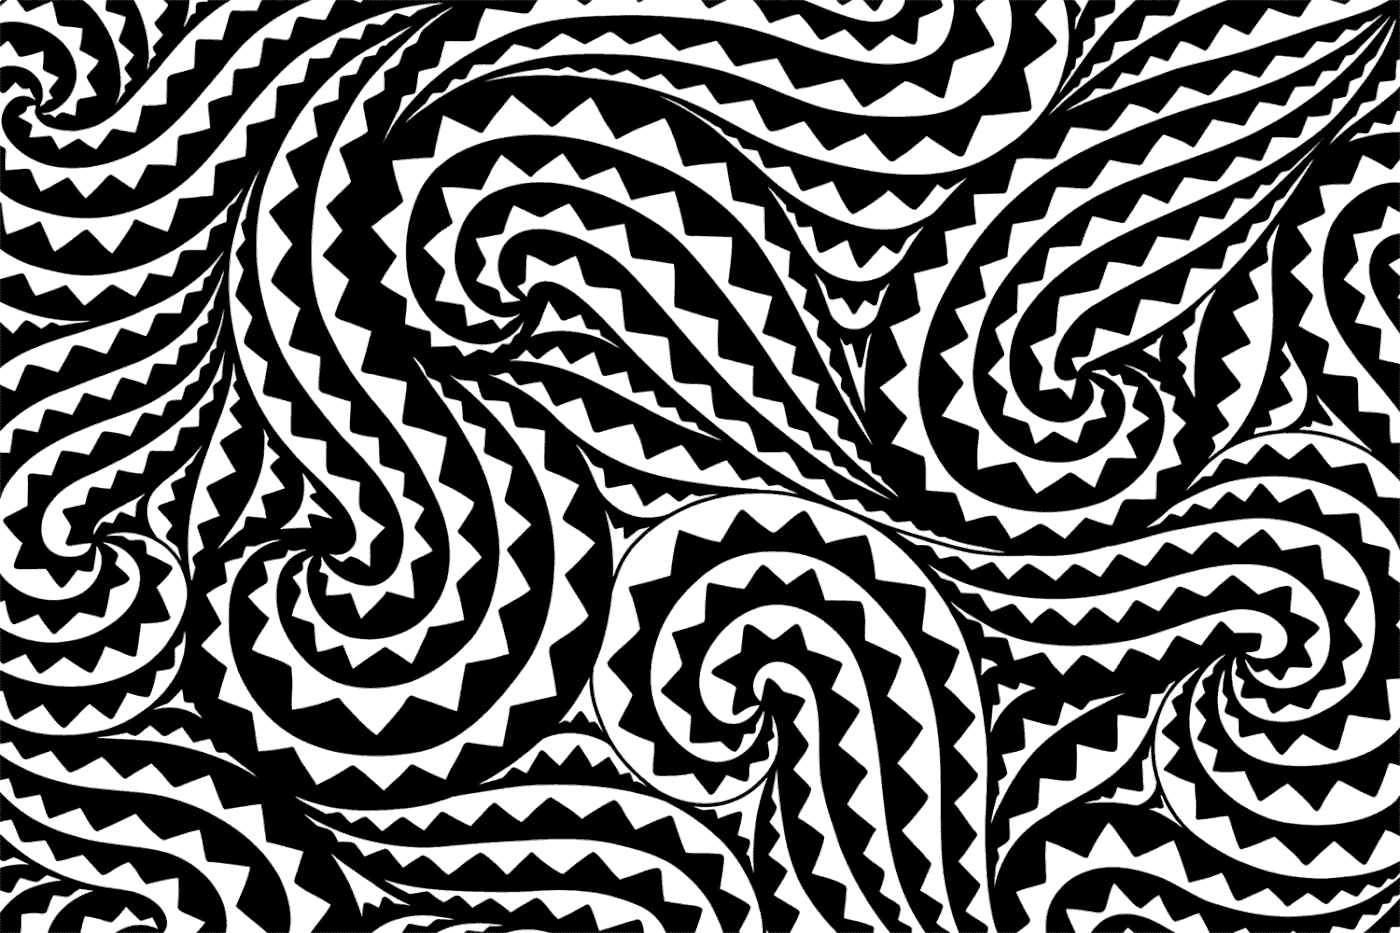 An animated abstract black and white pattern.